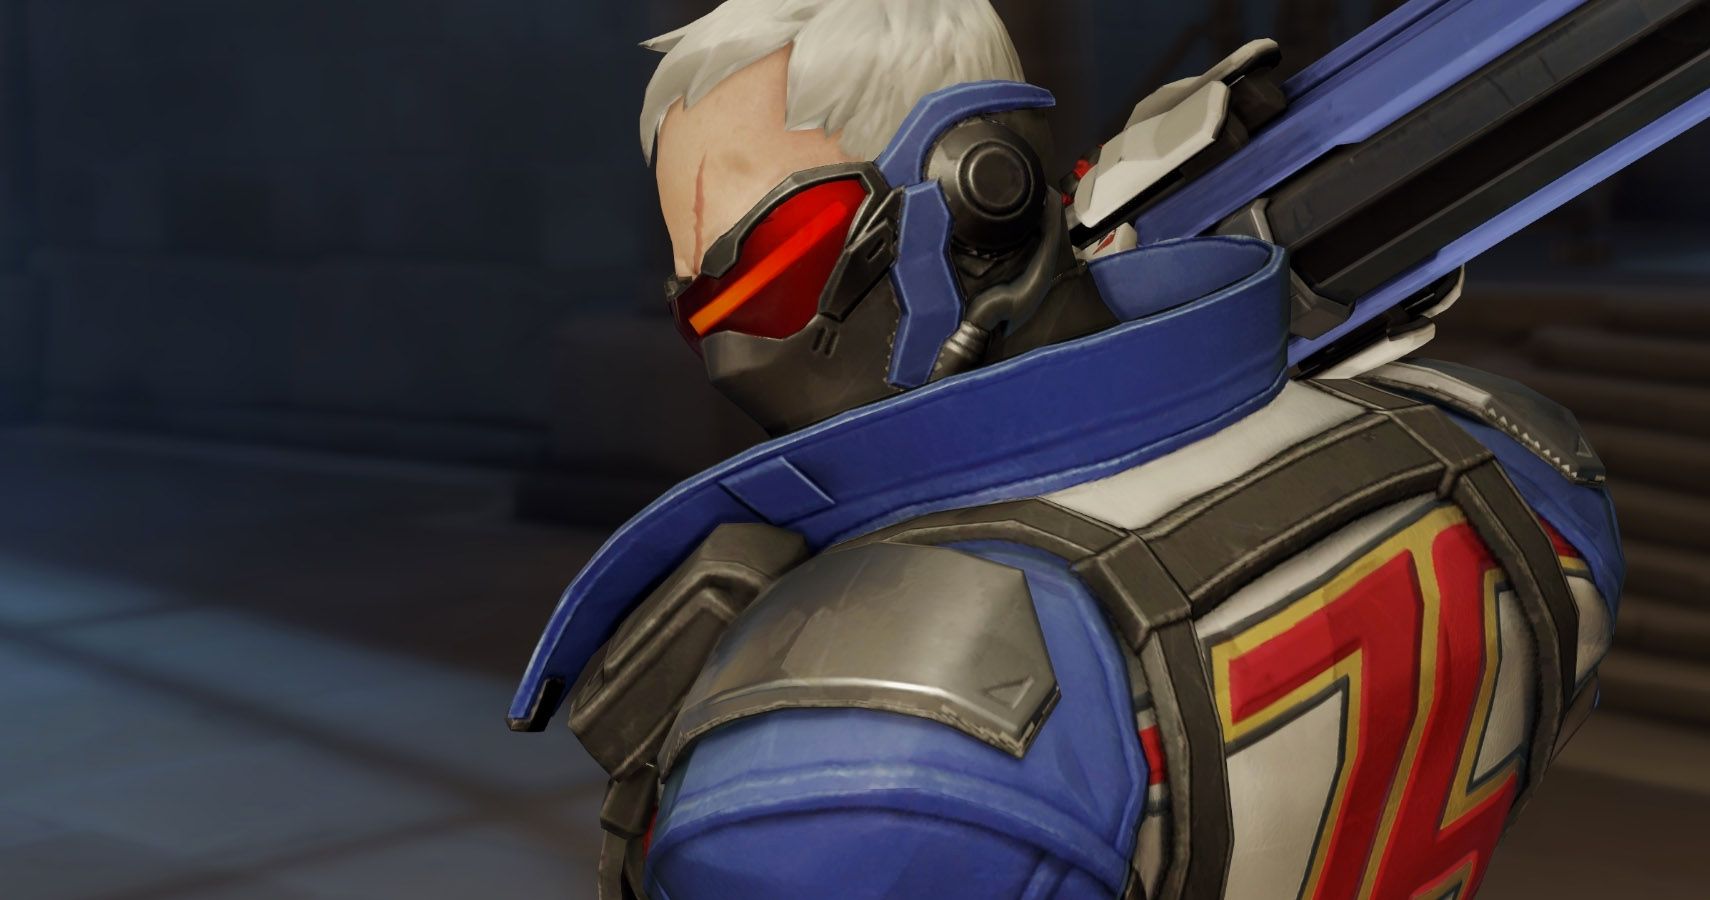 Overwatch: 10 Things About Soldier 76 You Didn't Know